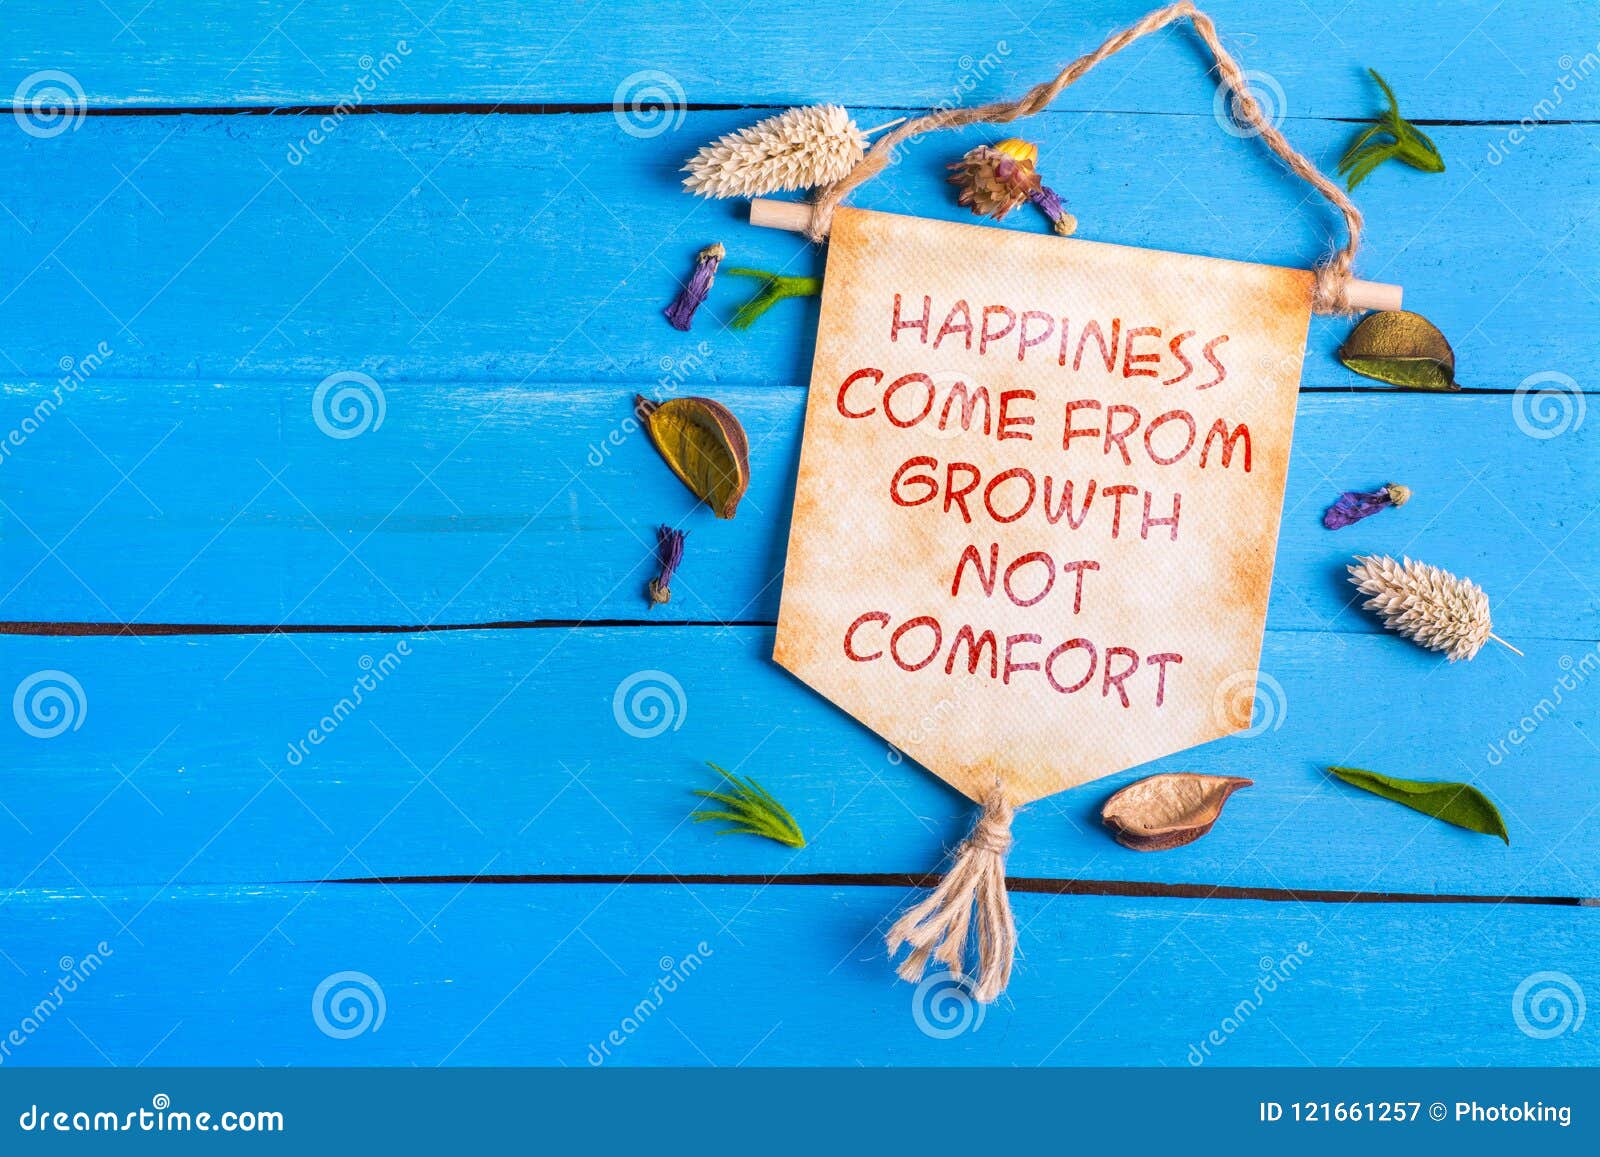 happiness come from growth not comfort text on paper scroll